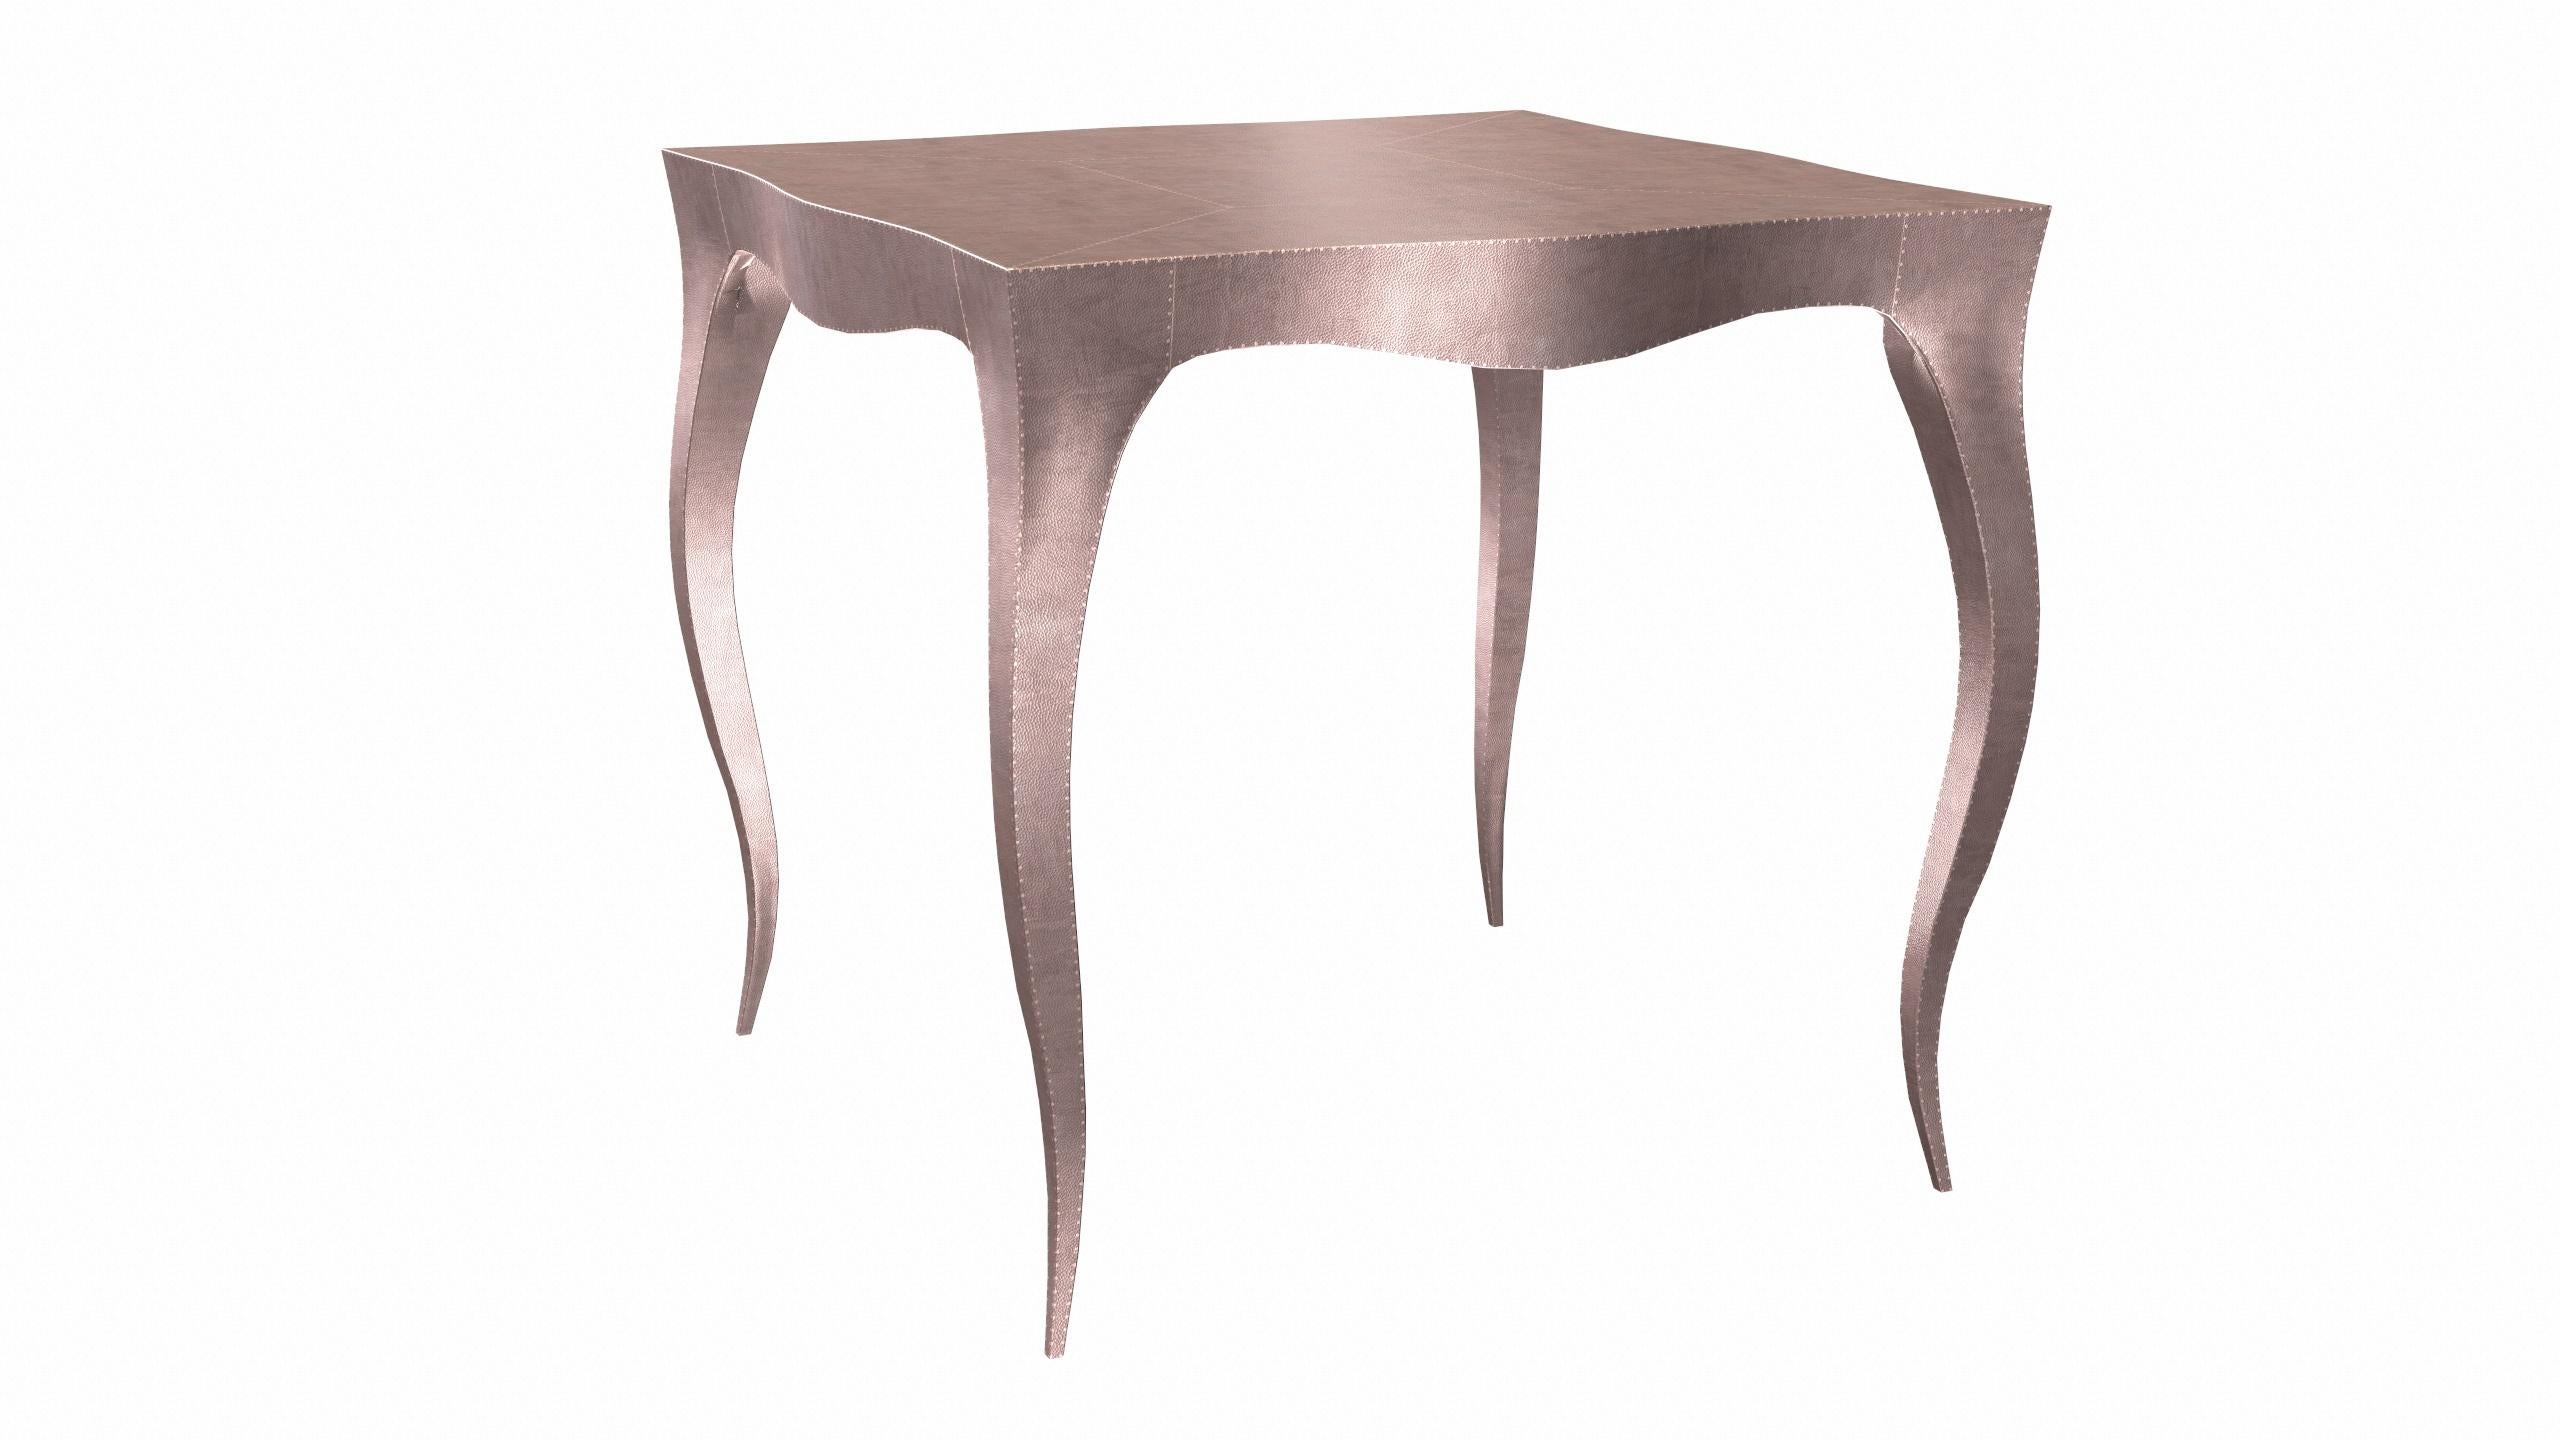 Woodwork Louise Art Deco Nesting Tables and Stacking Tables Mid. Hammered Copper  For Sale